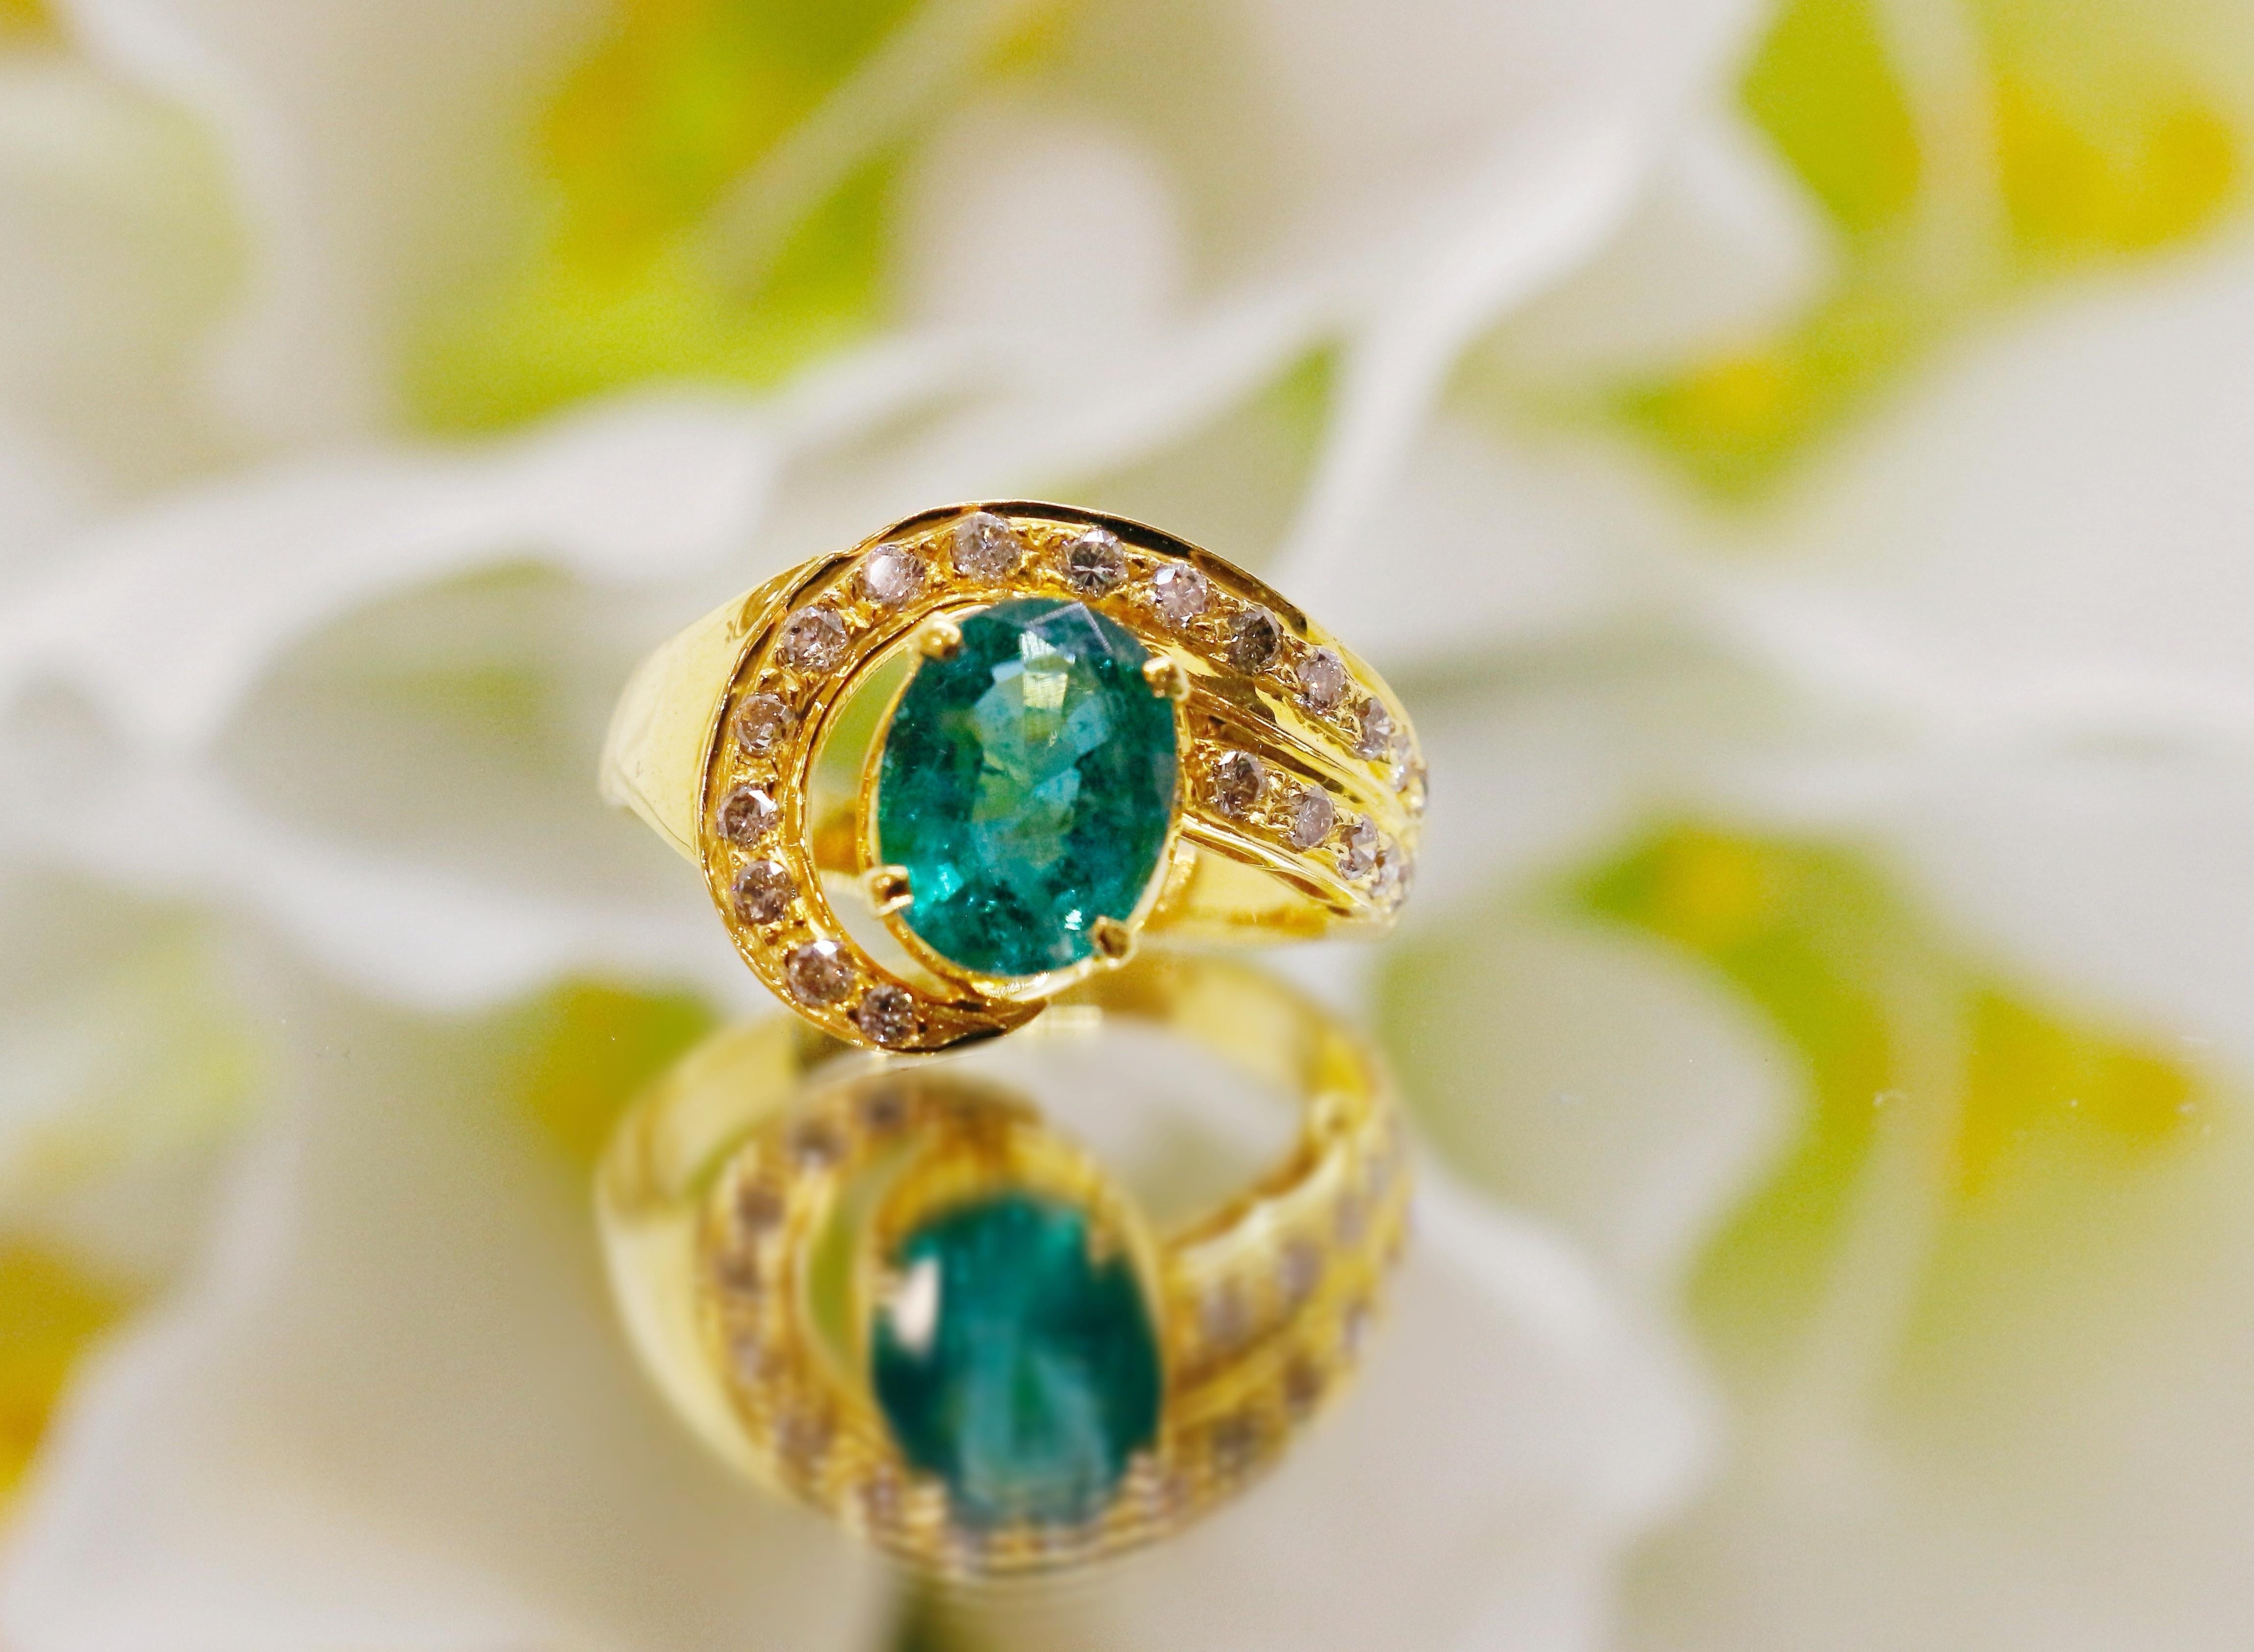 ◆Detail description◆

◆Solid 18k Gold(shown in picture)

◆Natural Emerald Weight: 1.50 CT

◆Diamond Carat: 0.30 CT

◆Diamond Shape: Round mixed

◆Total Weight: 5.1 Gram